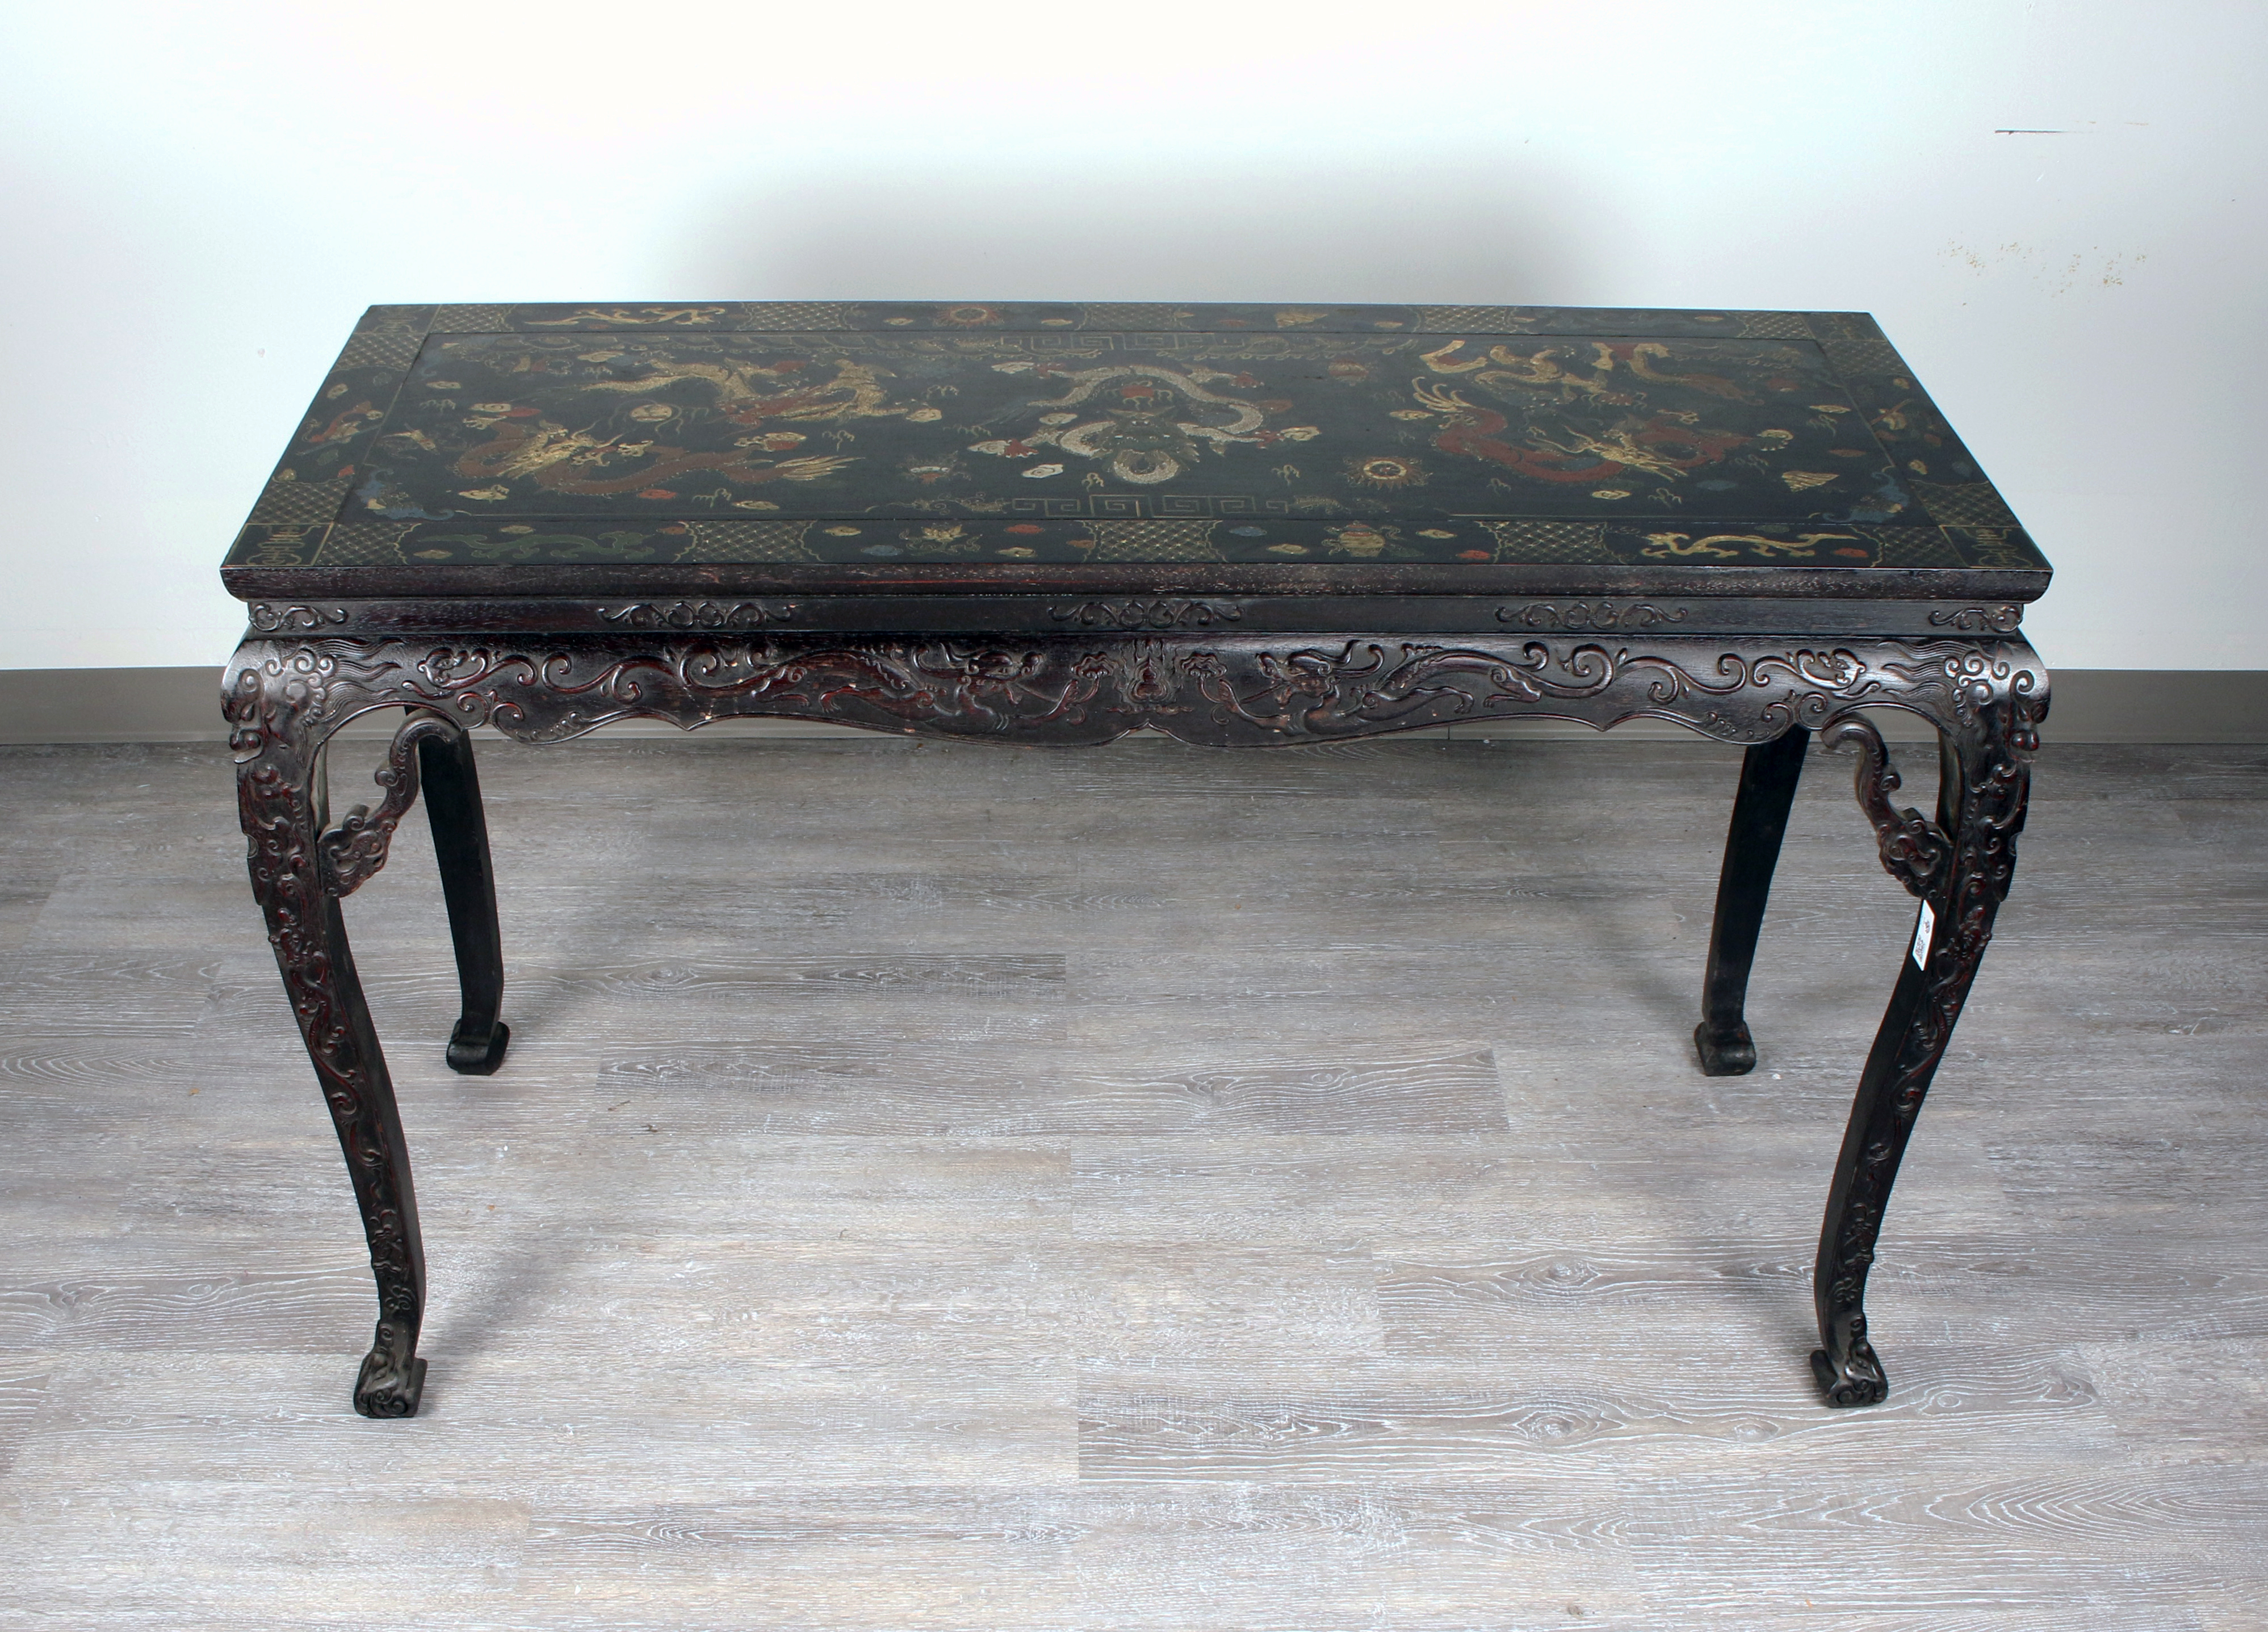 Vibrant Chinese Lacquer Table With Dragon Painting & Scholar Motifs image 5